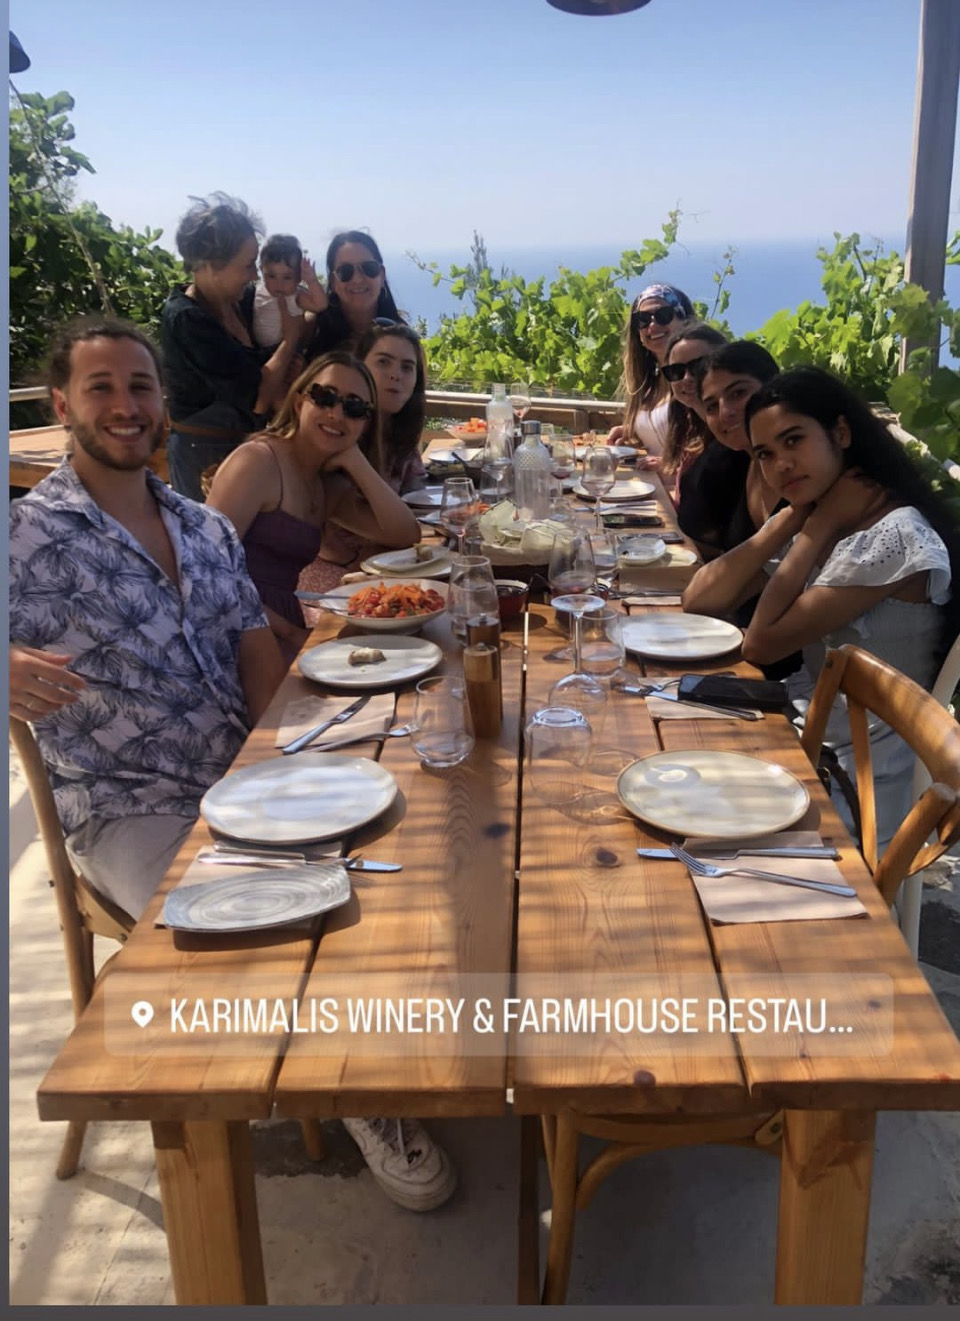 Nutrition sciences and nursing students in Greece at a long dining table over looking the ocean.